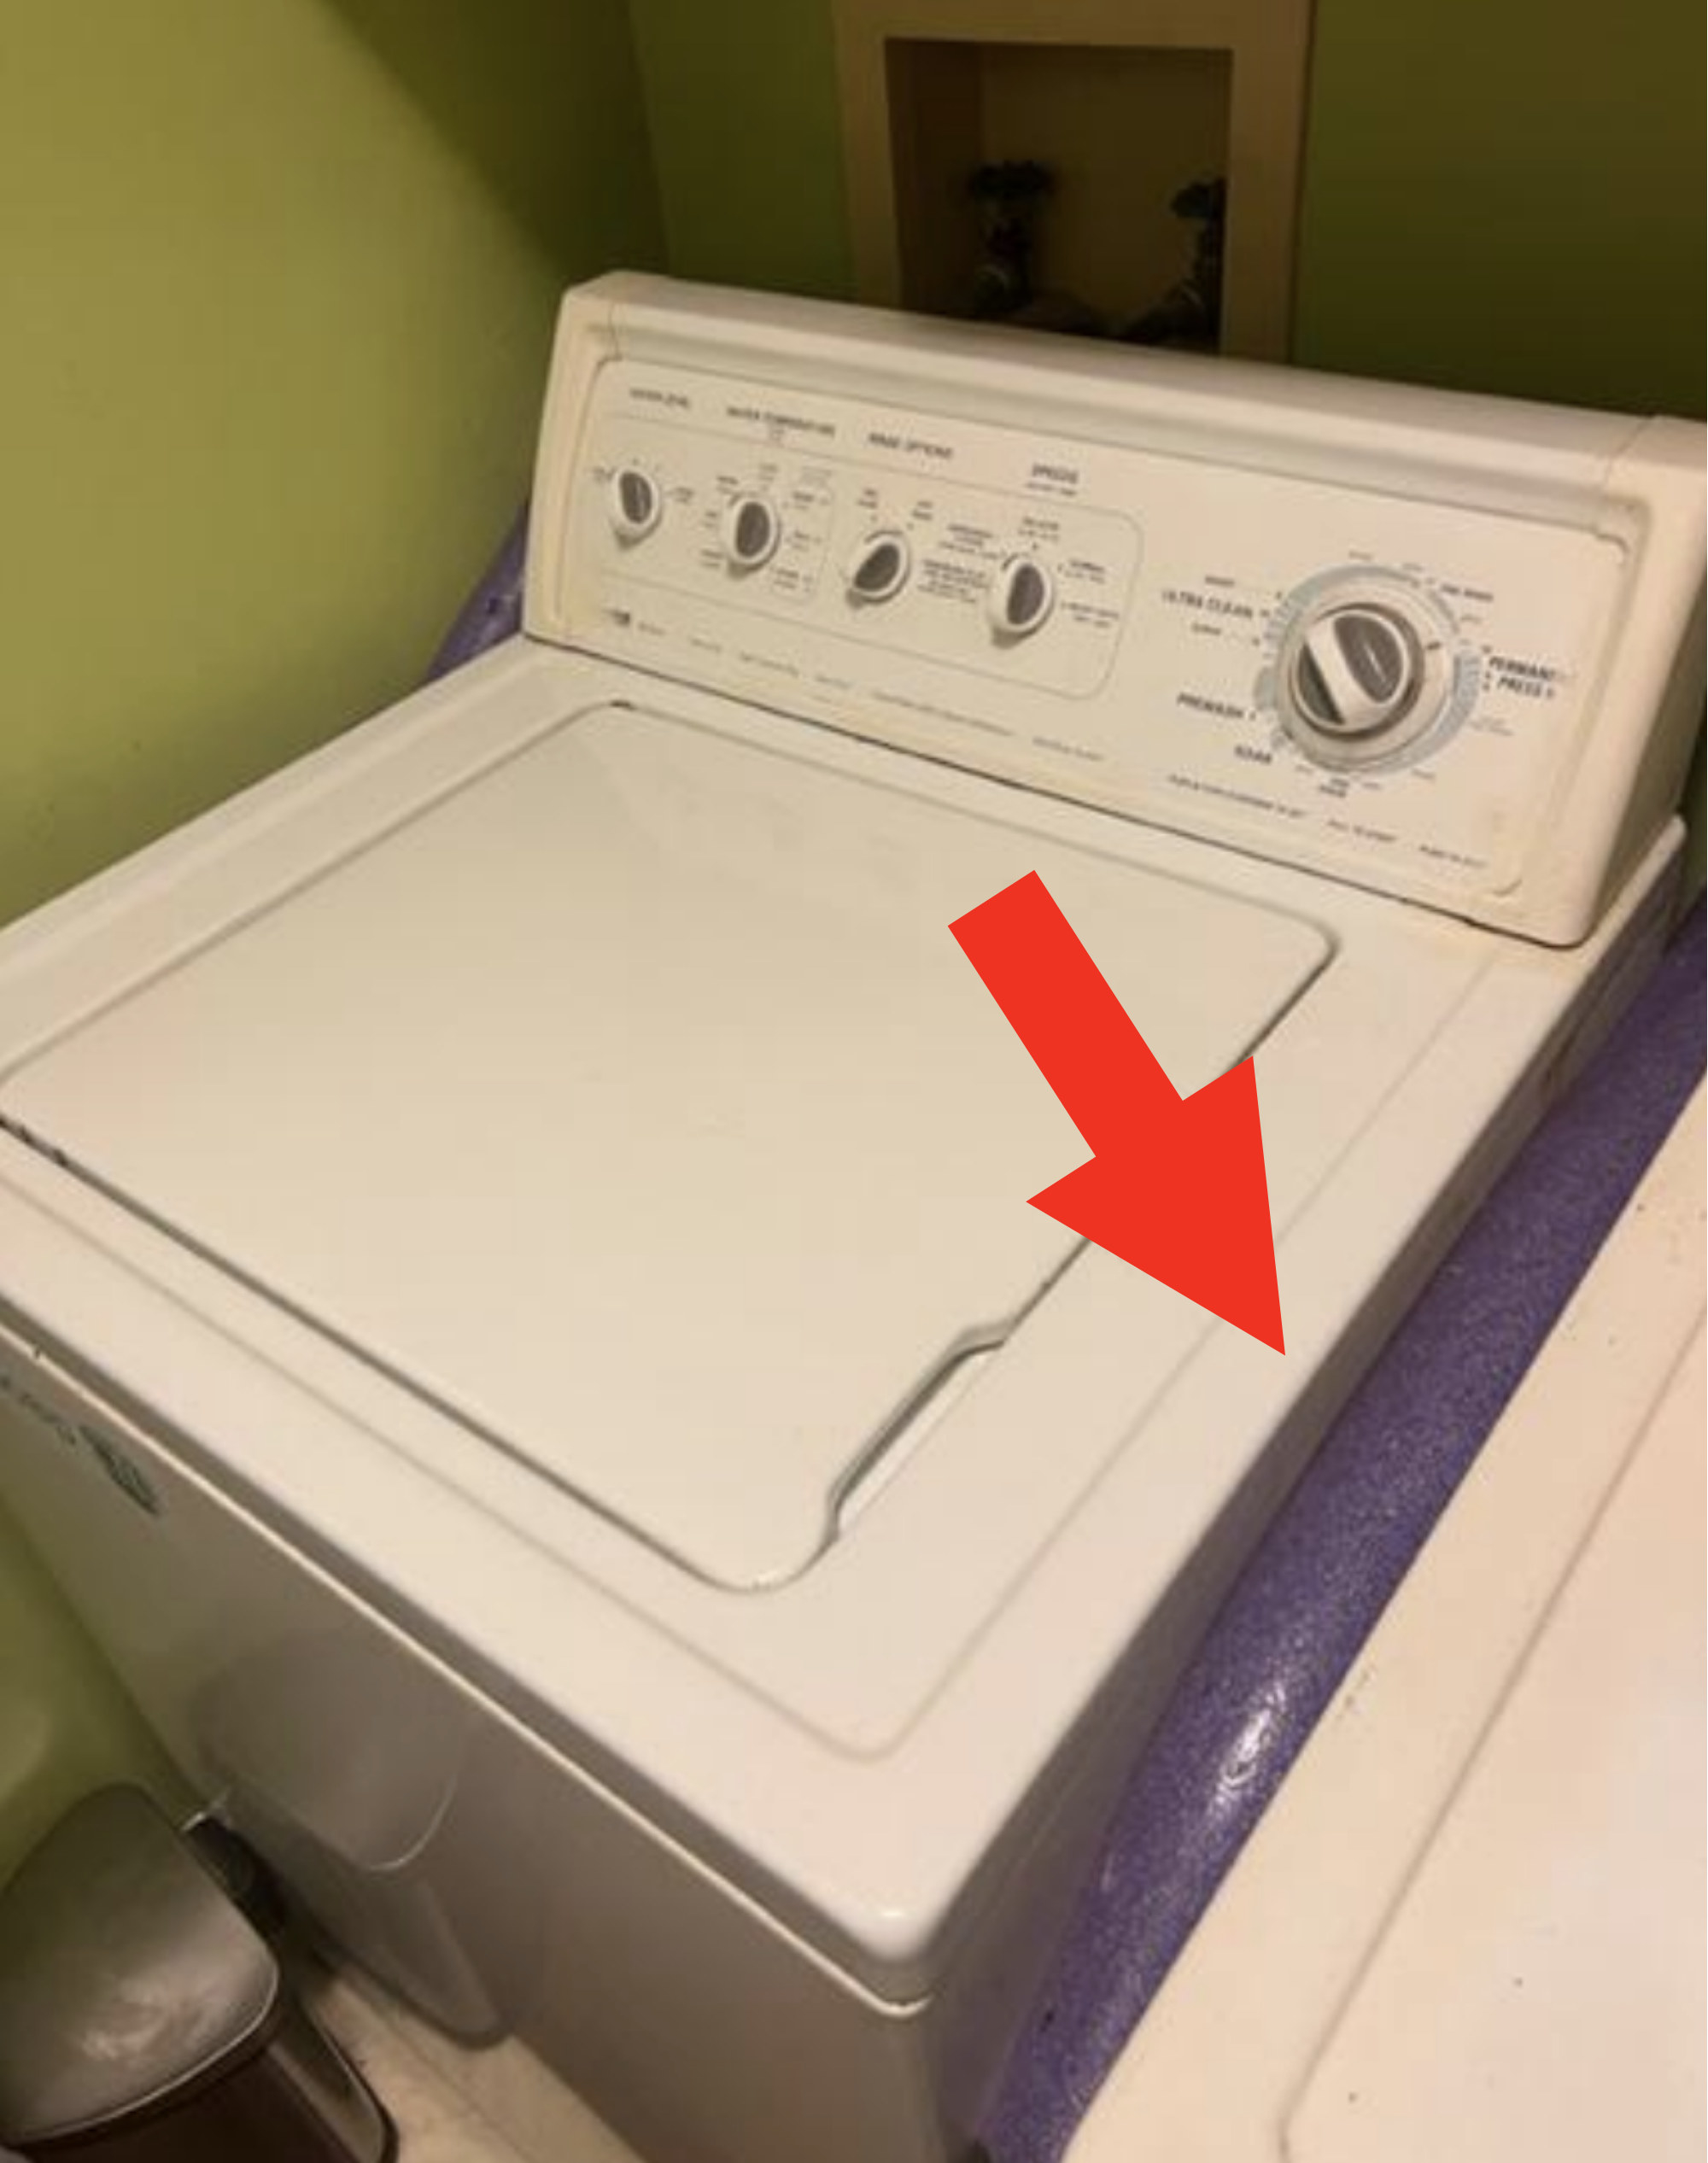 A pool noddle between a washing machine and dryer